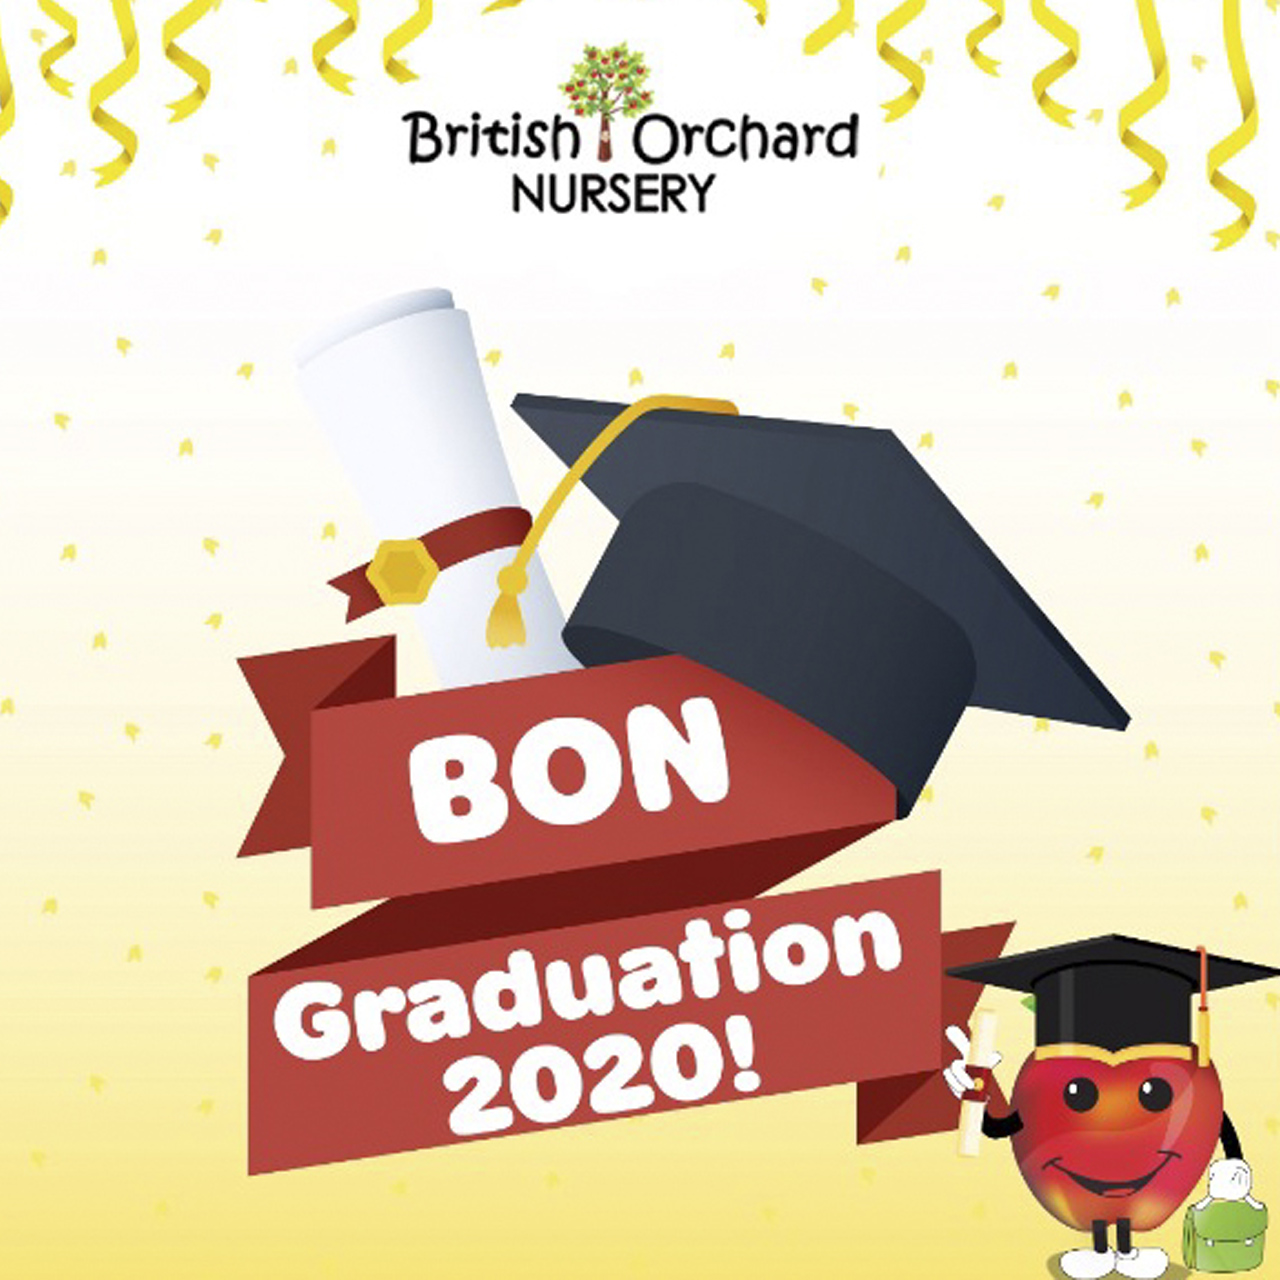 British Orchard Nursery wishes Congratulations to the Graduating